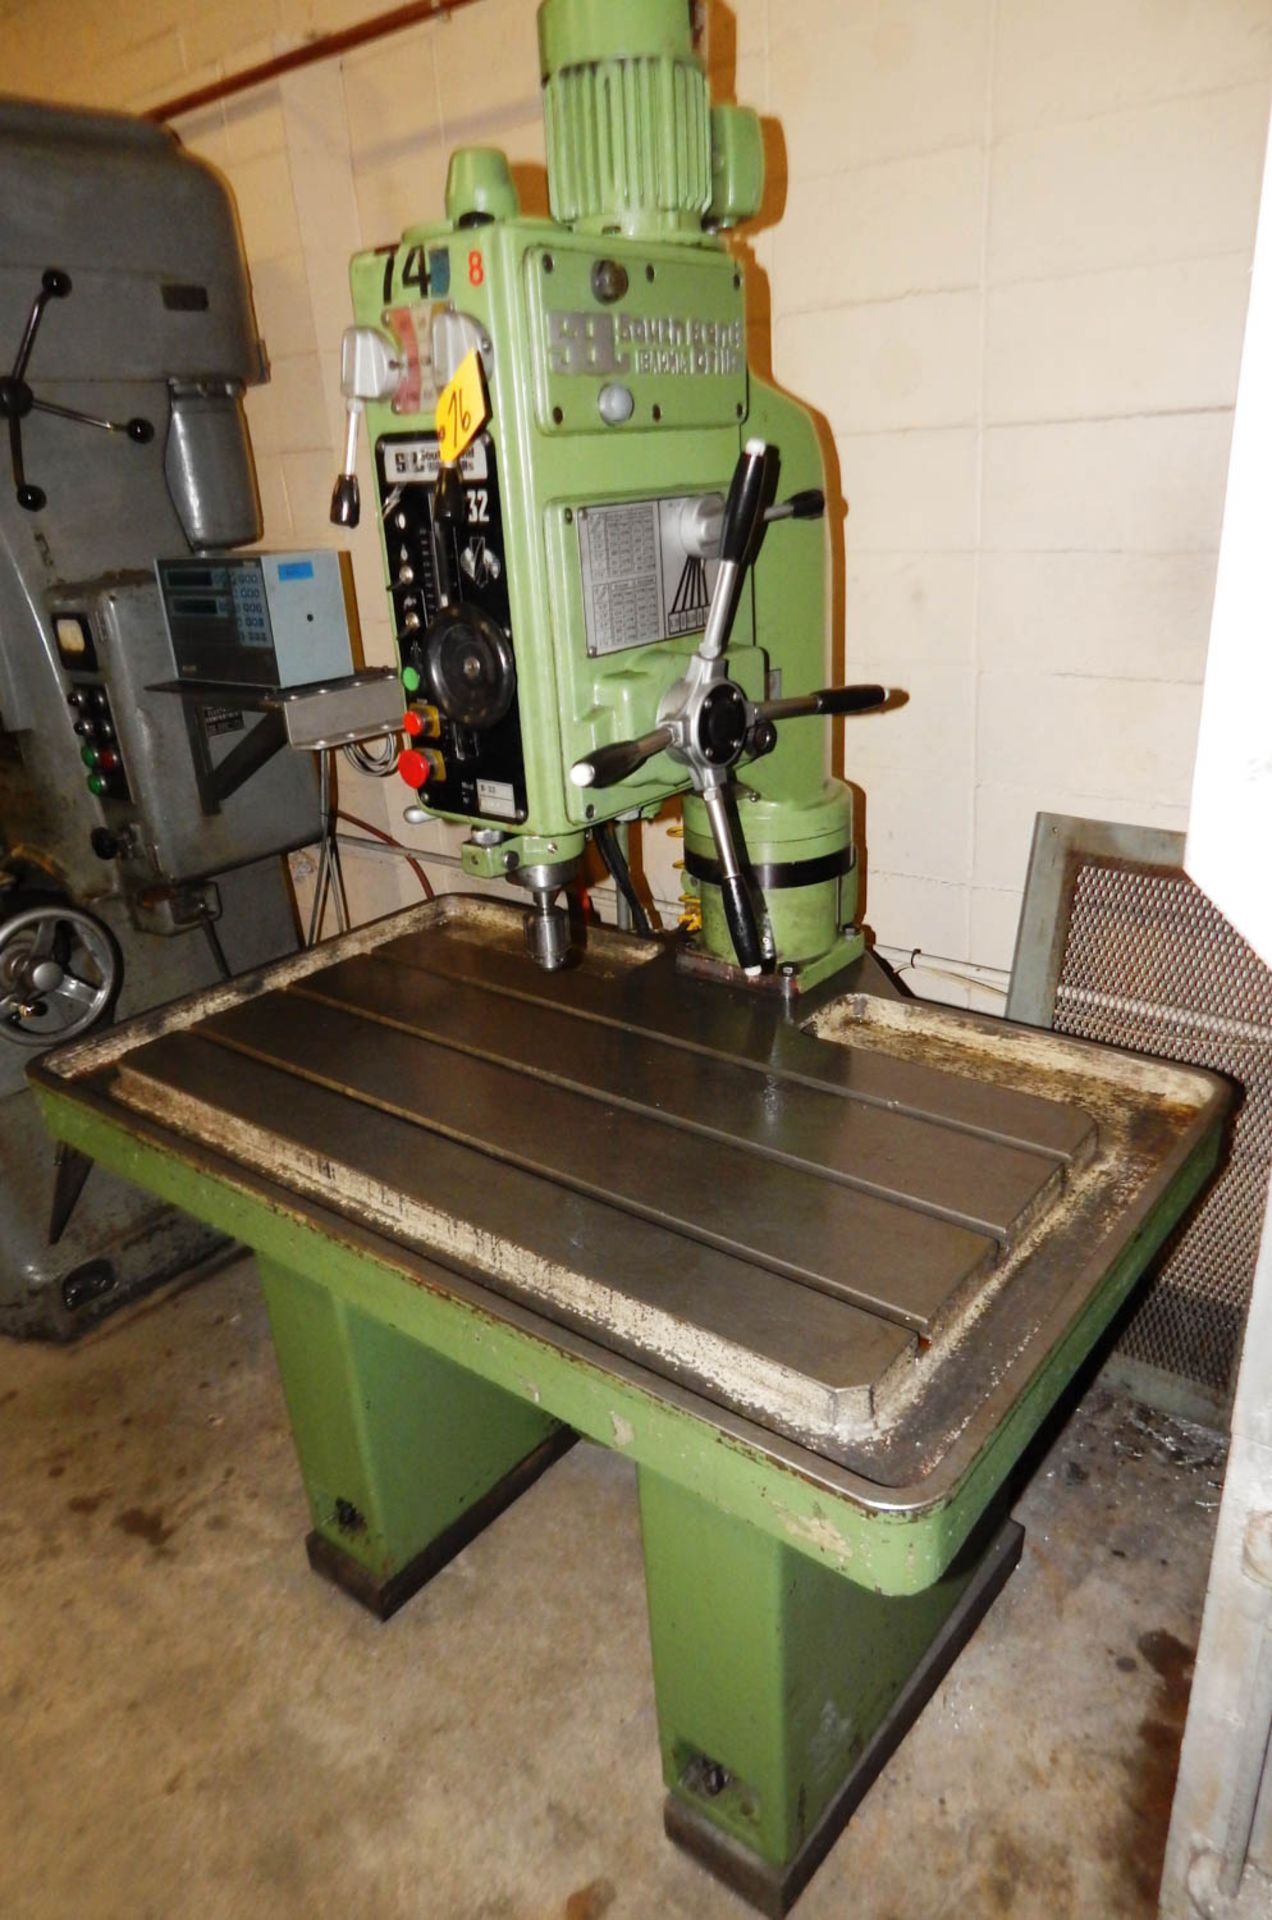 SOUTHBEND GEARED HEAD DRILL PRESS MDL B-32, 190-1774 RPM, 21'' X 44'' TABLE, S/N: 845-E - Image 2 of 3